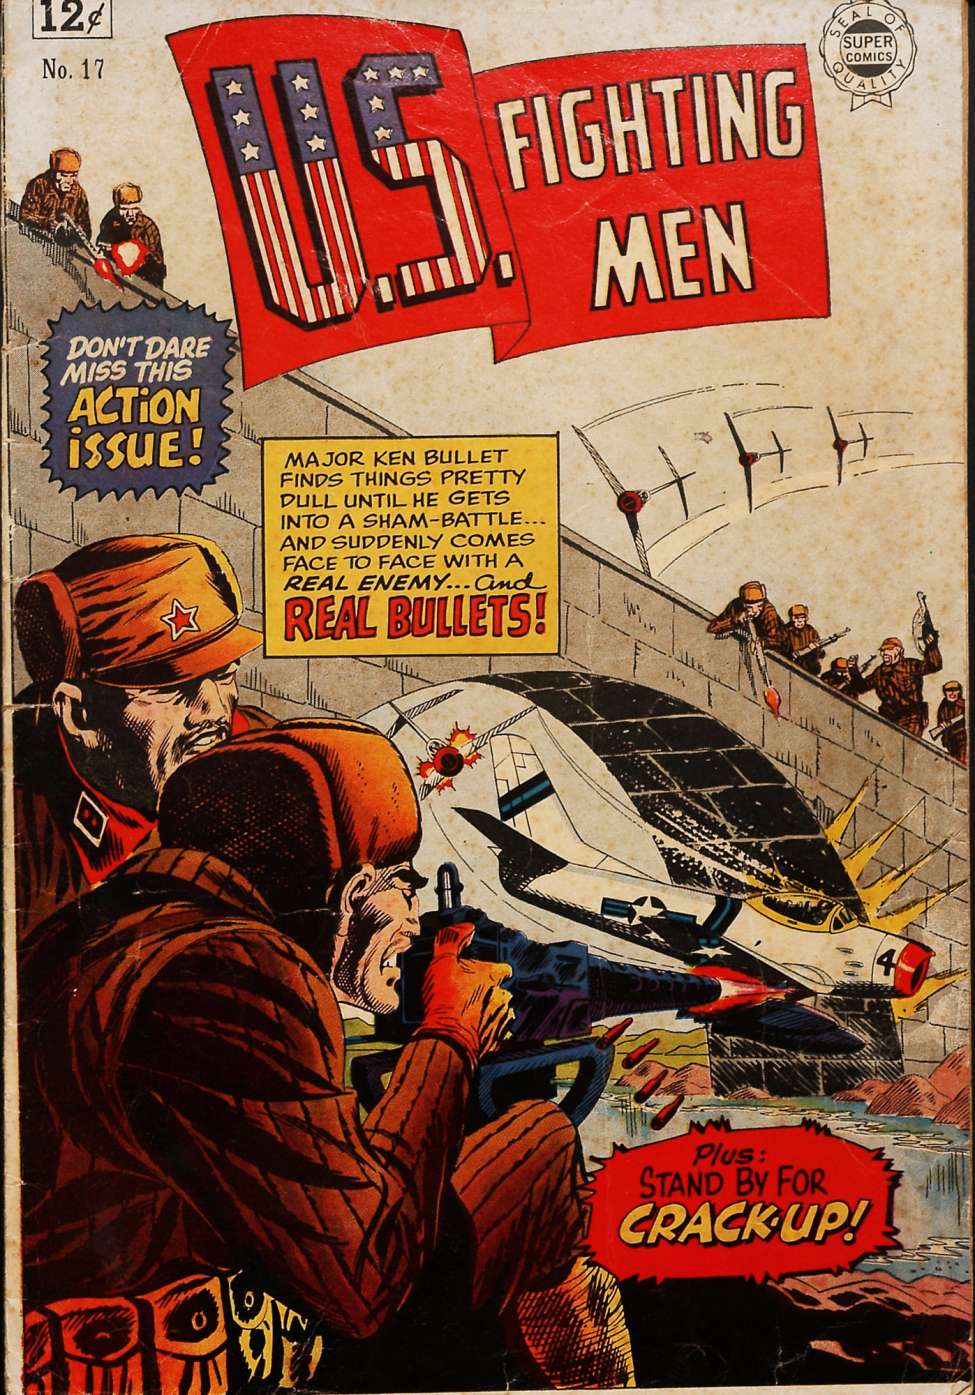 Book Cover For U.S. Fighting Men 17